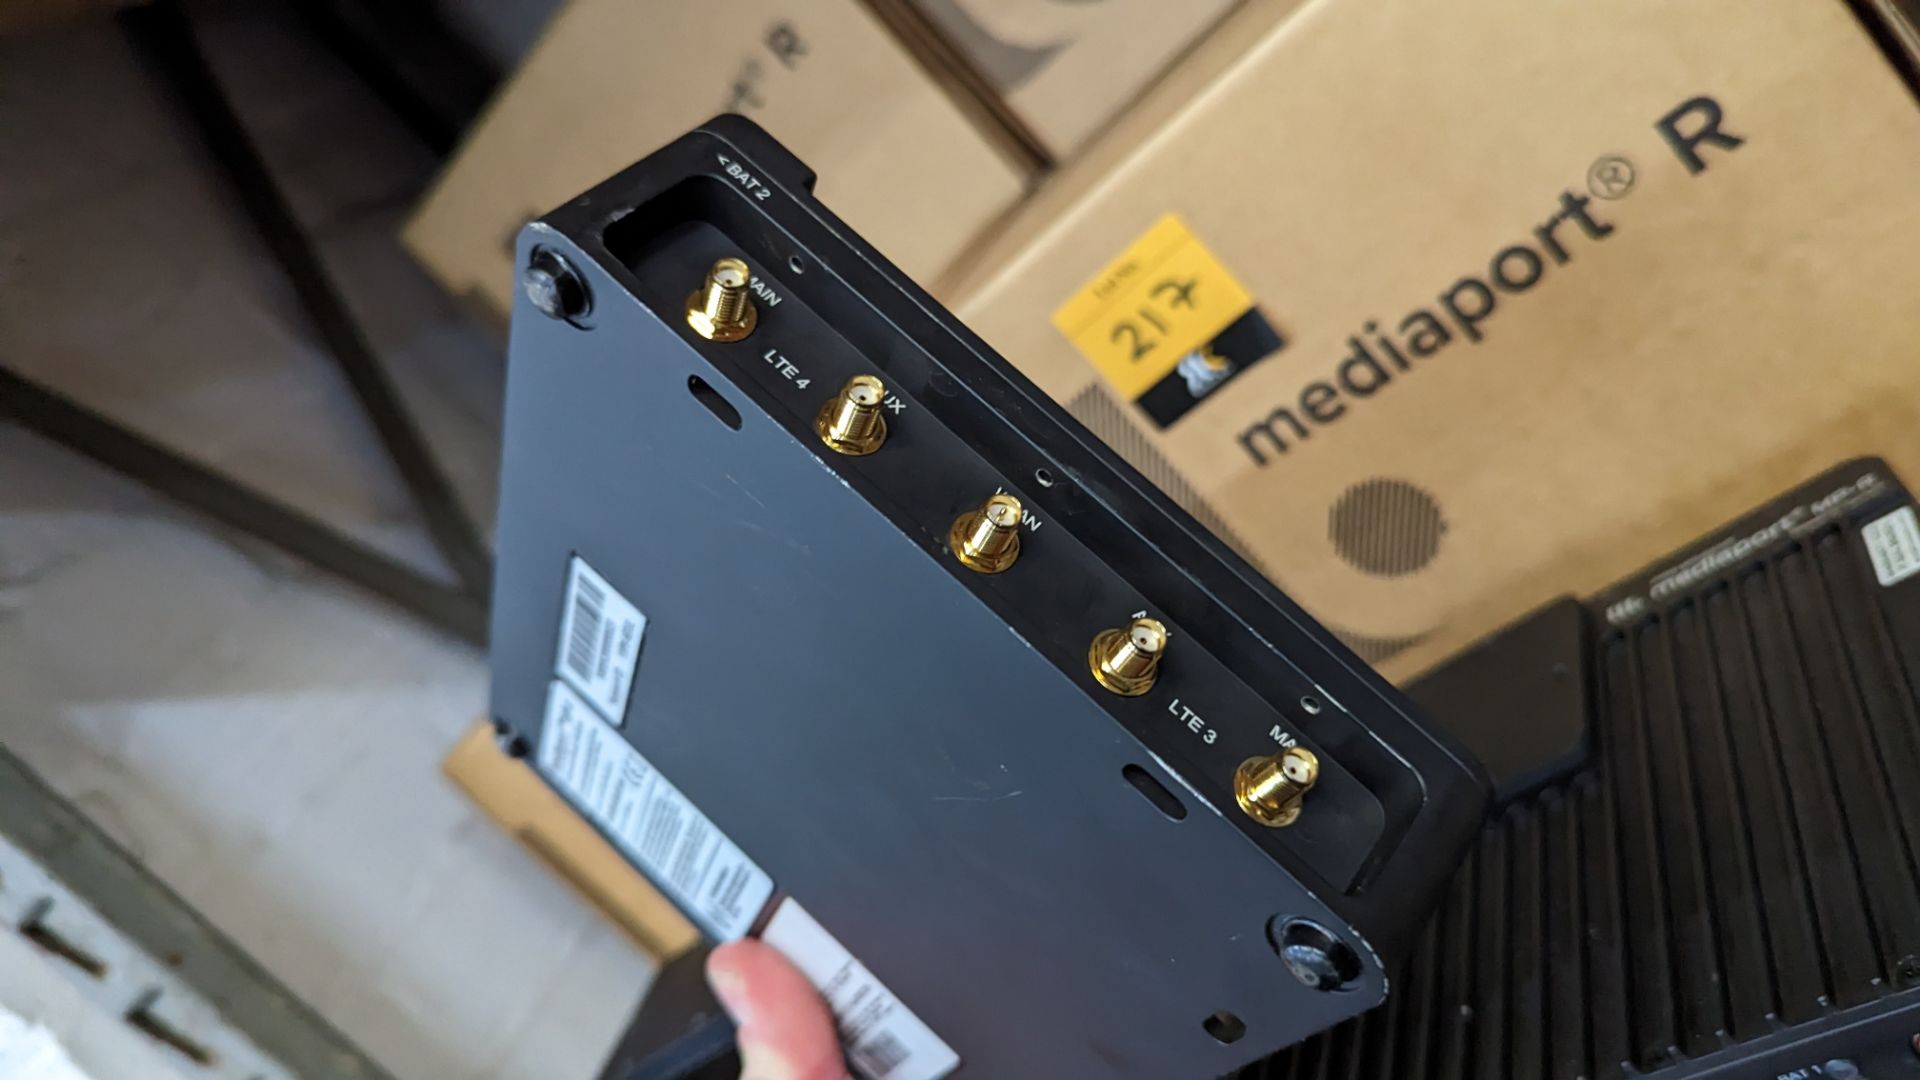 5 off Mediaport model MP-R - although some of the units are boxed there are no ancillaries/accessori - Image 8 of 8